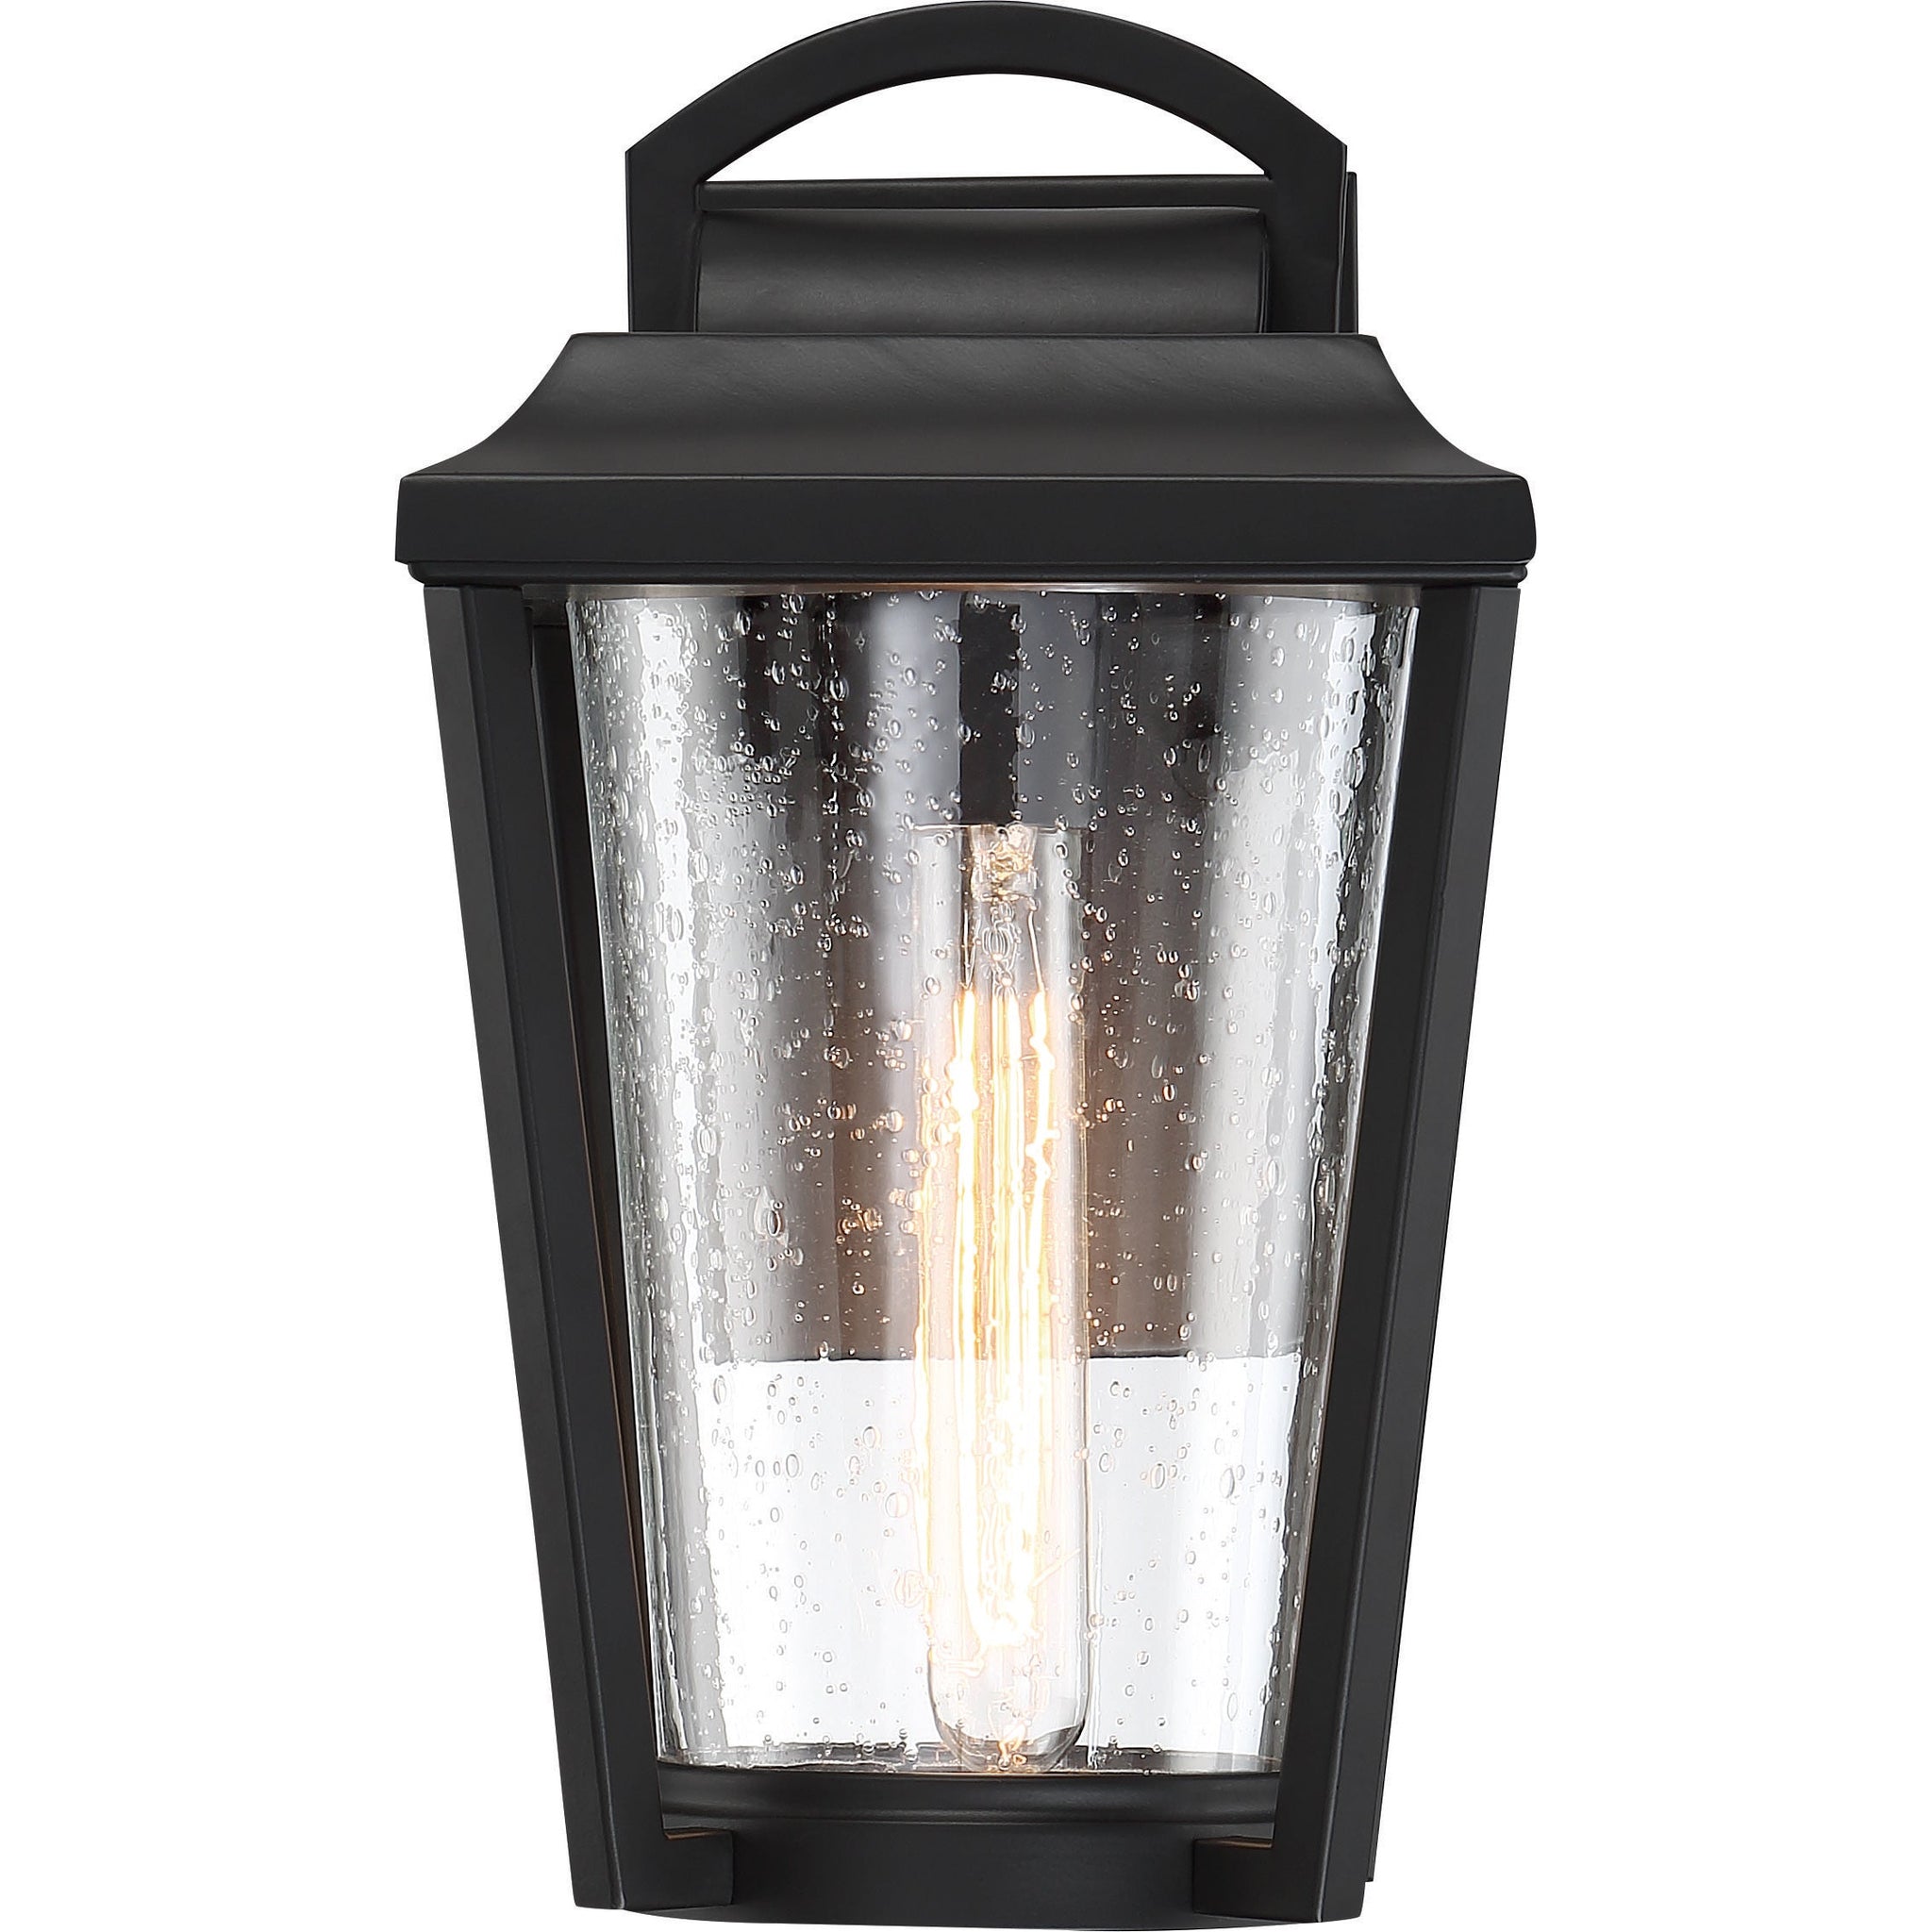 Lakeview 1-Light Small Outdoor Wall Light